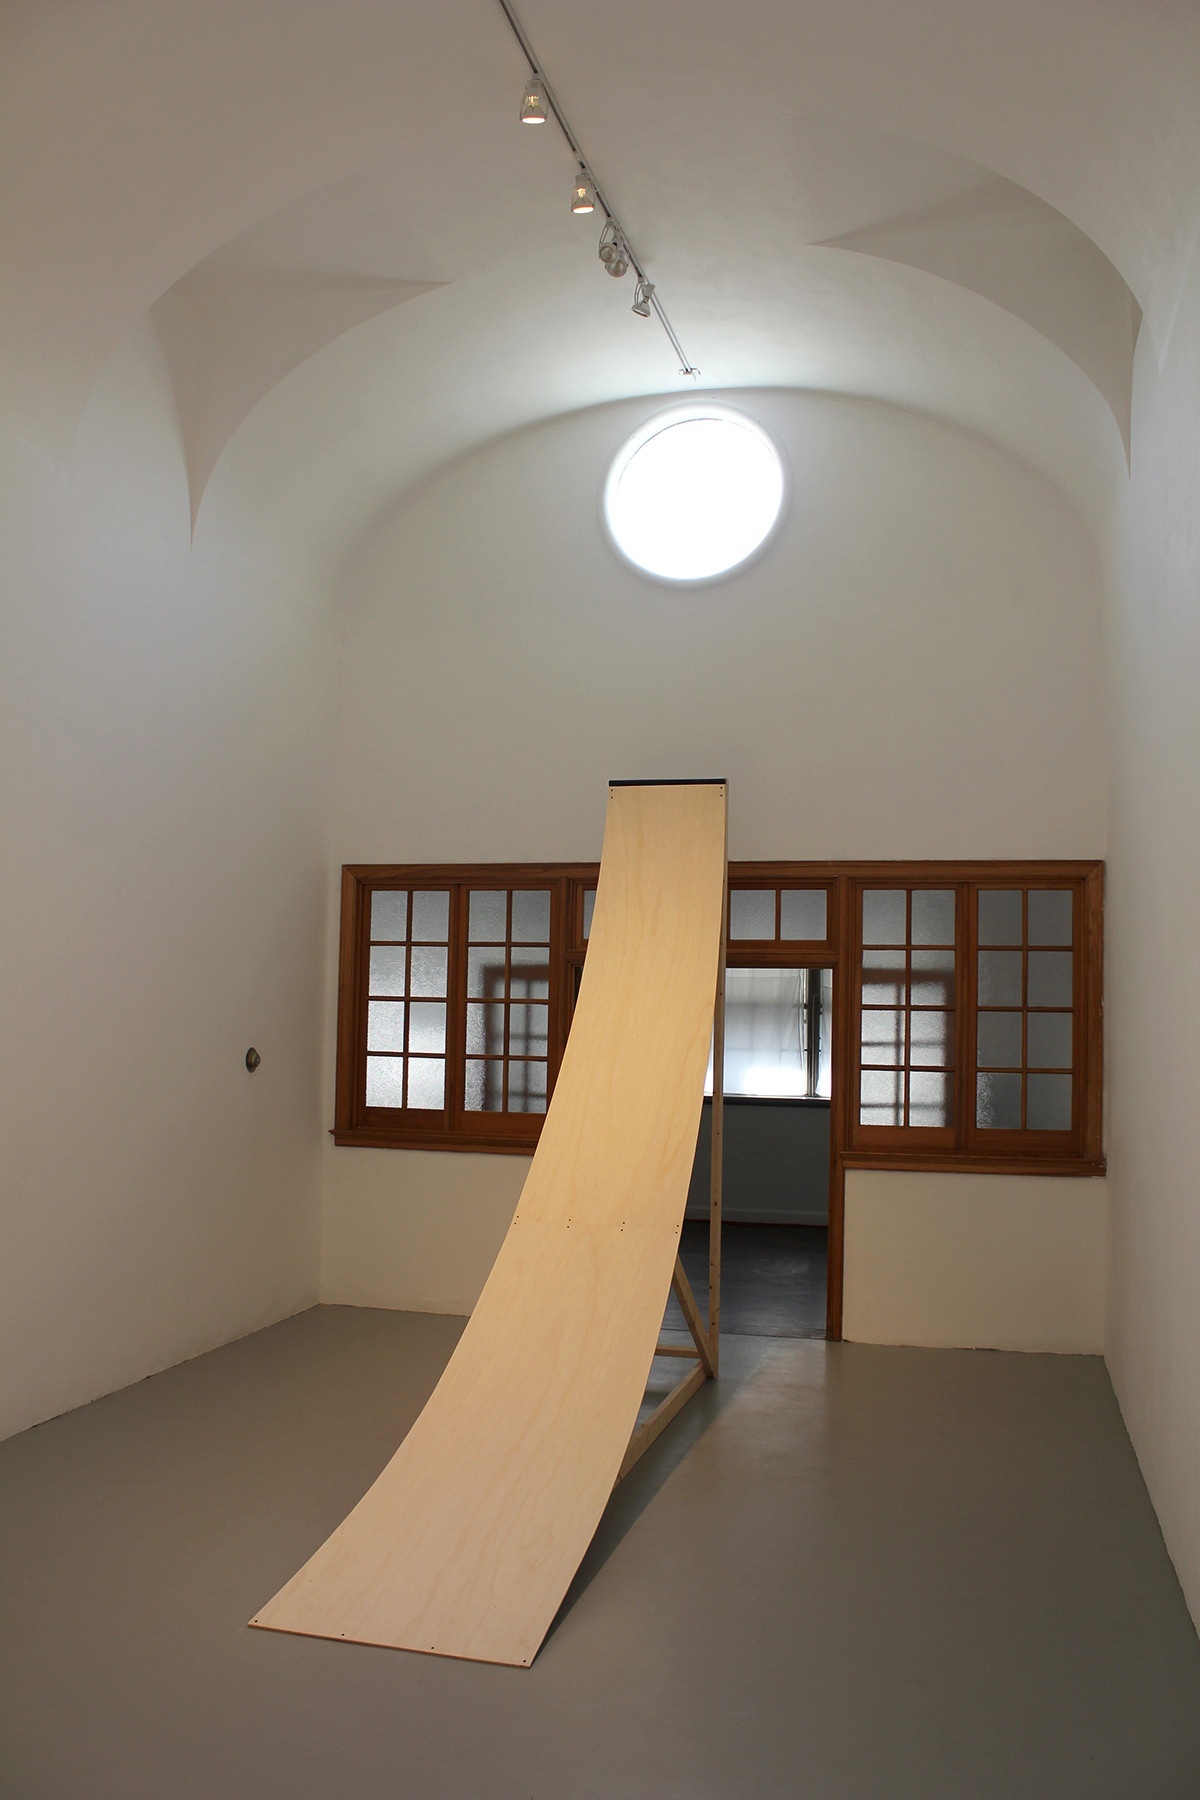 A gallery space: the walls are white and arch overhead, the floor gray. There is a circular window at the top in the center, through which bright light shines through, illuminating the gallery: in the center of the space is a curved wooden ramp supported by a wooden structure in front of an opening (whose windows and door are framed with wood).